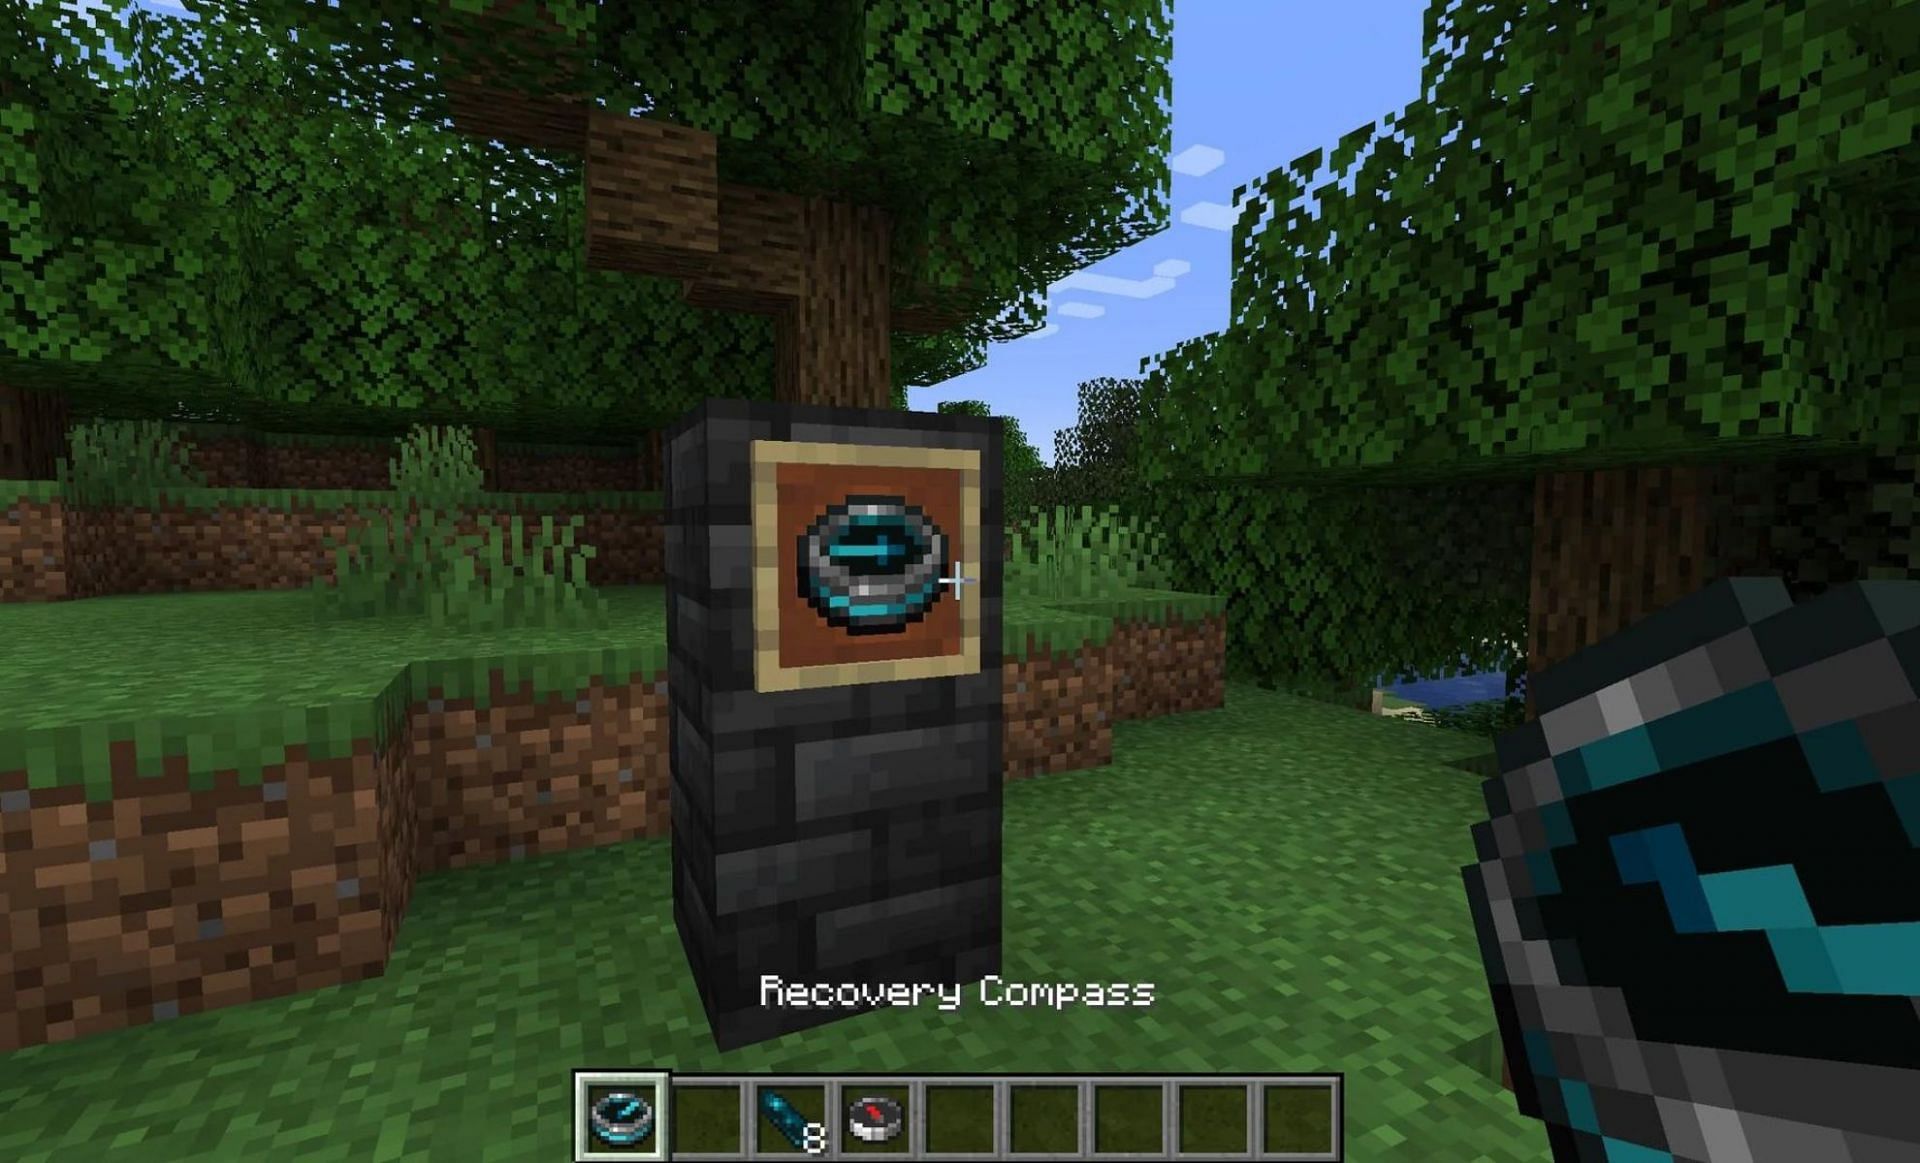 Recovery compass (Image via Minecraft Wiki)